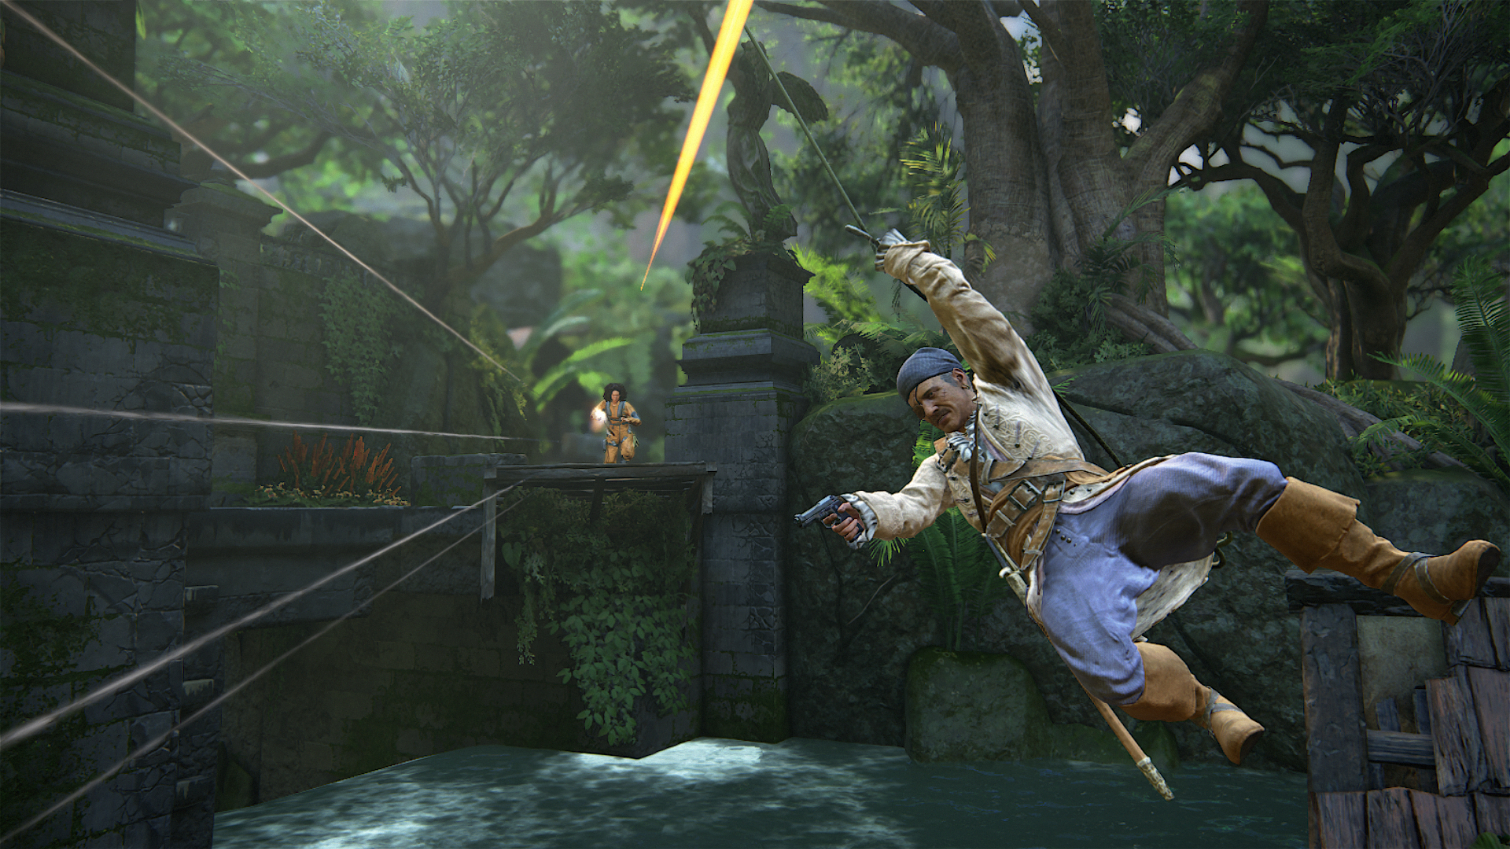 A scene from Uncharted 4's multiplayer mode